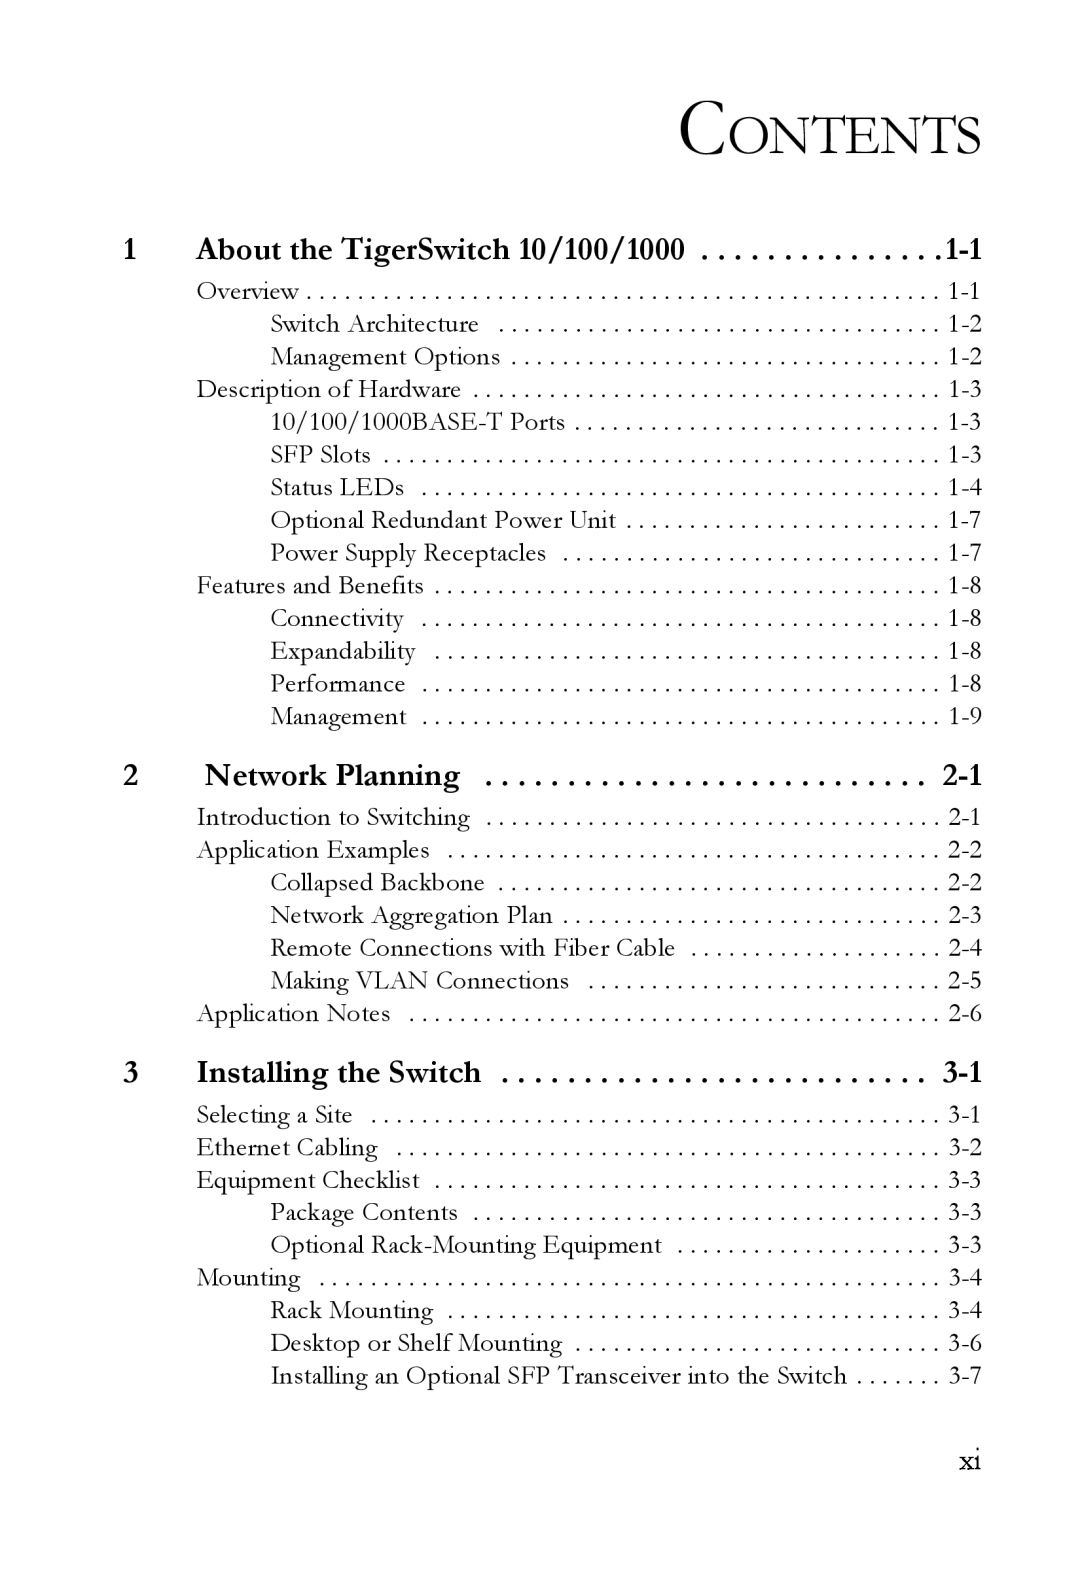 SMC Networks SMC8624T manual Contents, About the TigerSwitch 10/100/1000, Network Planning, Installing the Switch 